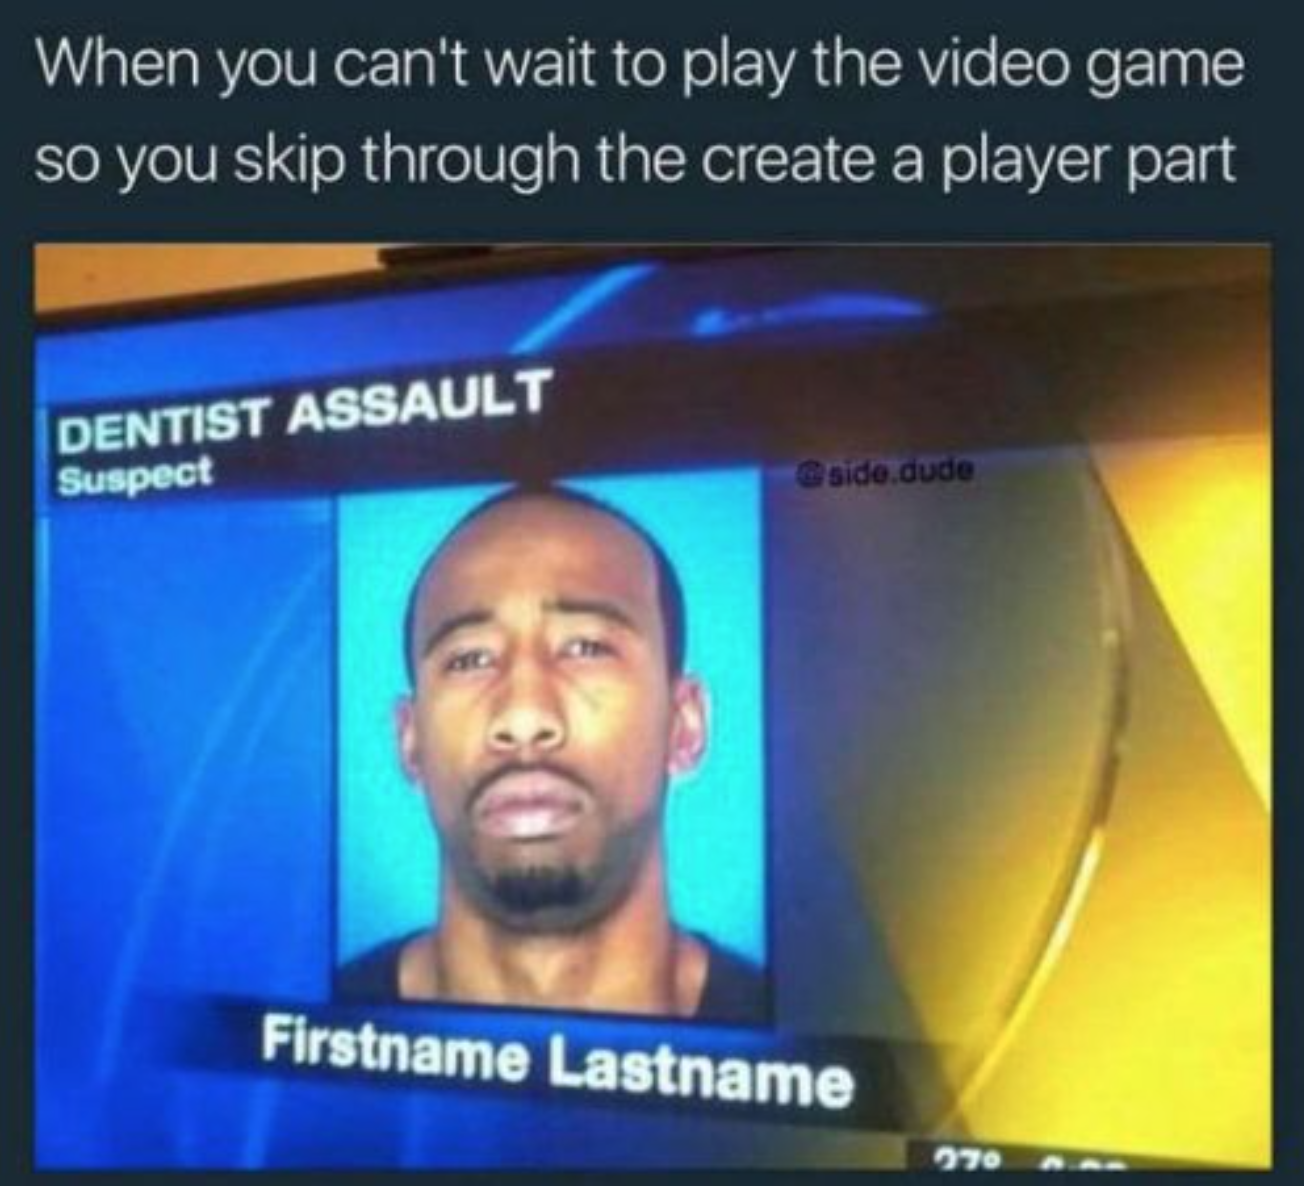 funny gaming memes - funny tv news headlines - When you can't wait to play the video game so you skip through the create a player part Dentist Assault Suspect sido dude Firstname Lastname 970